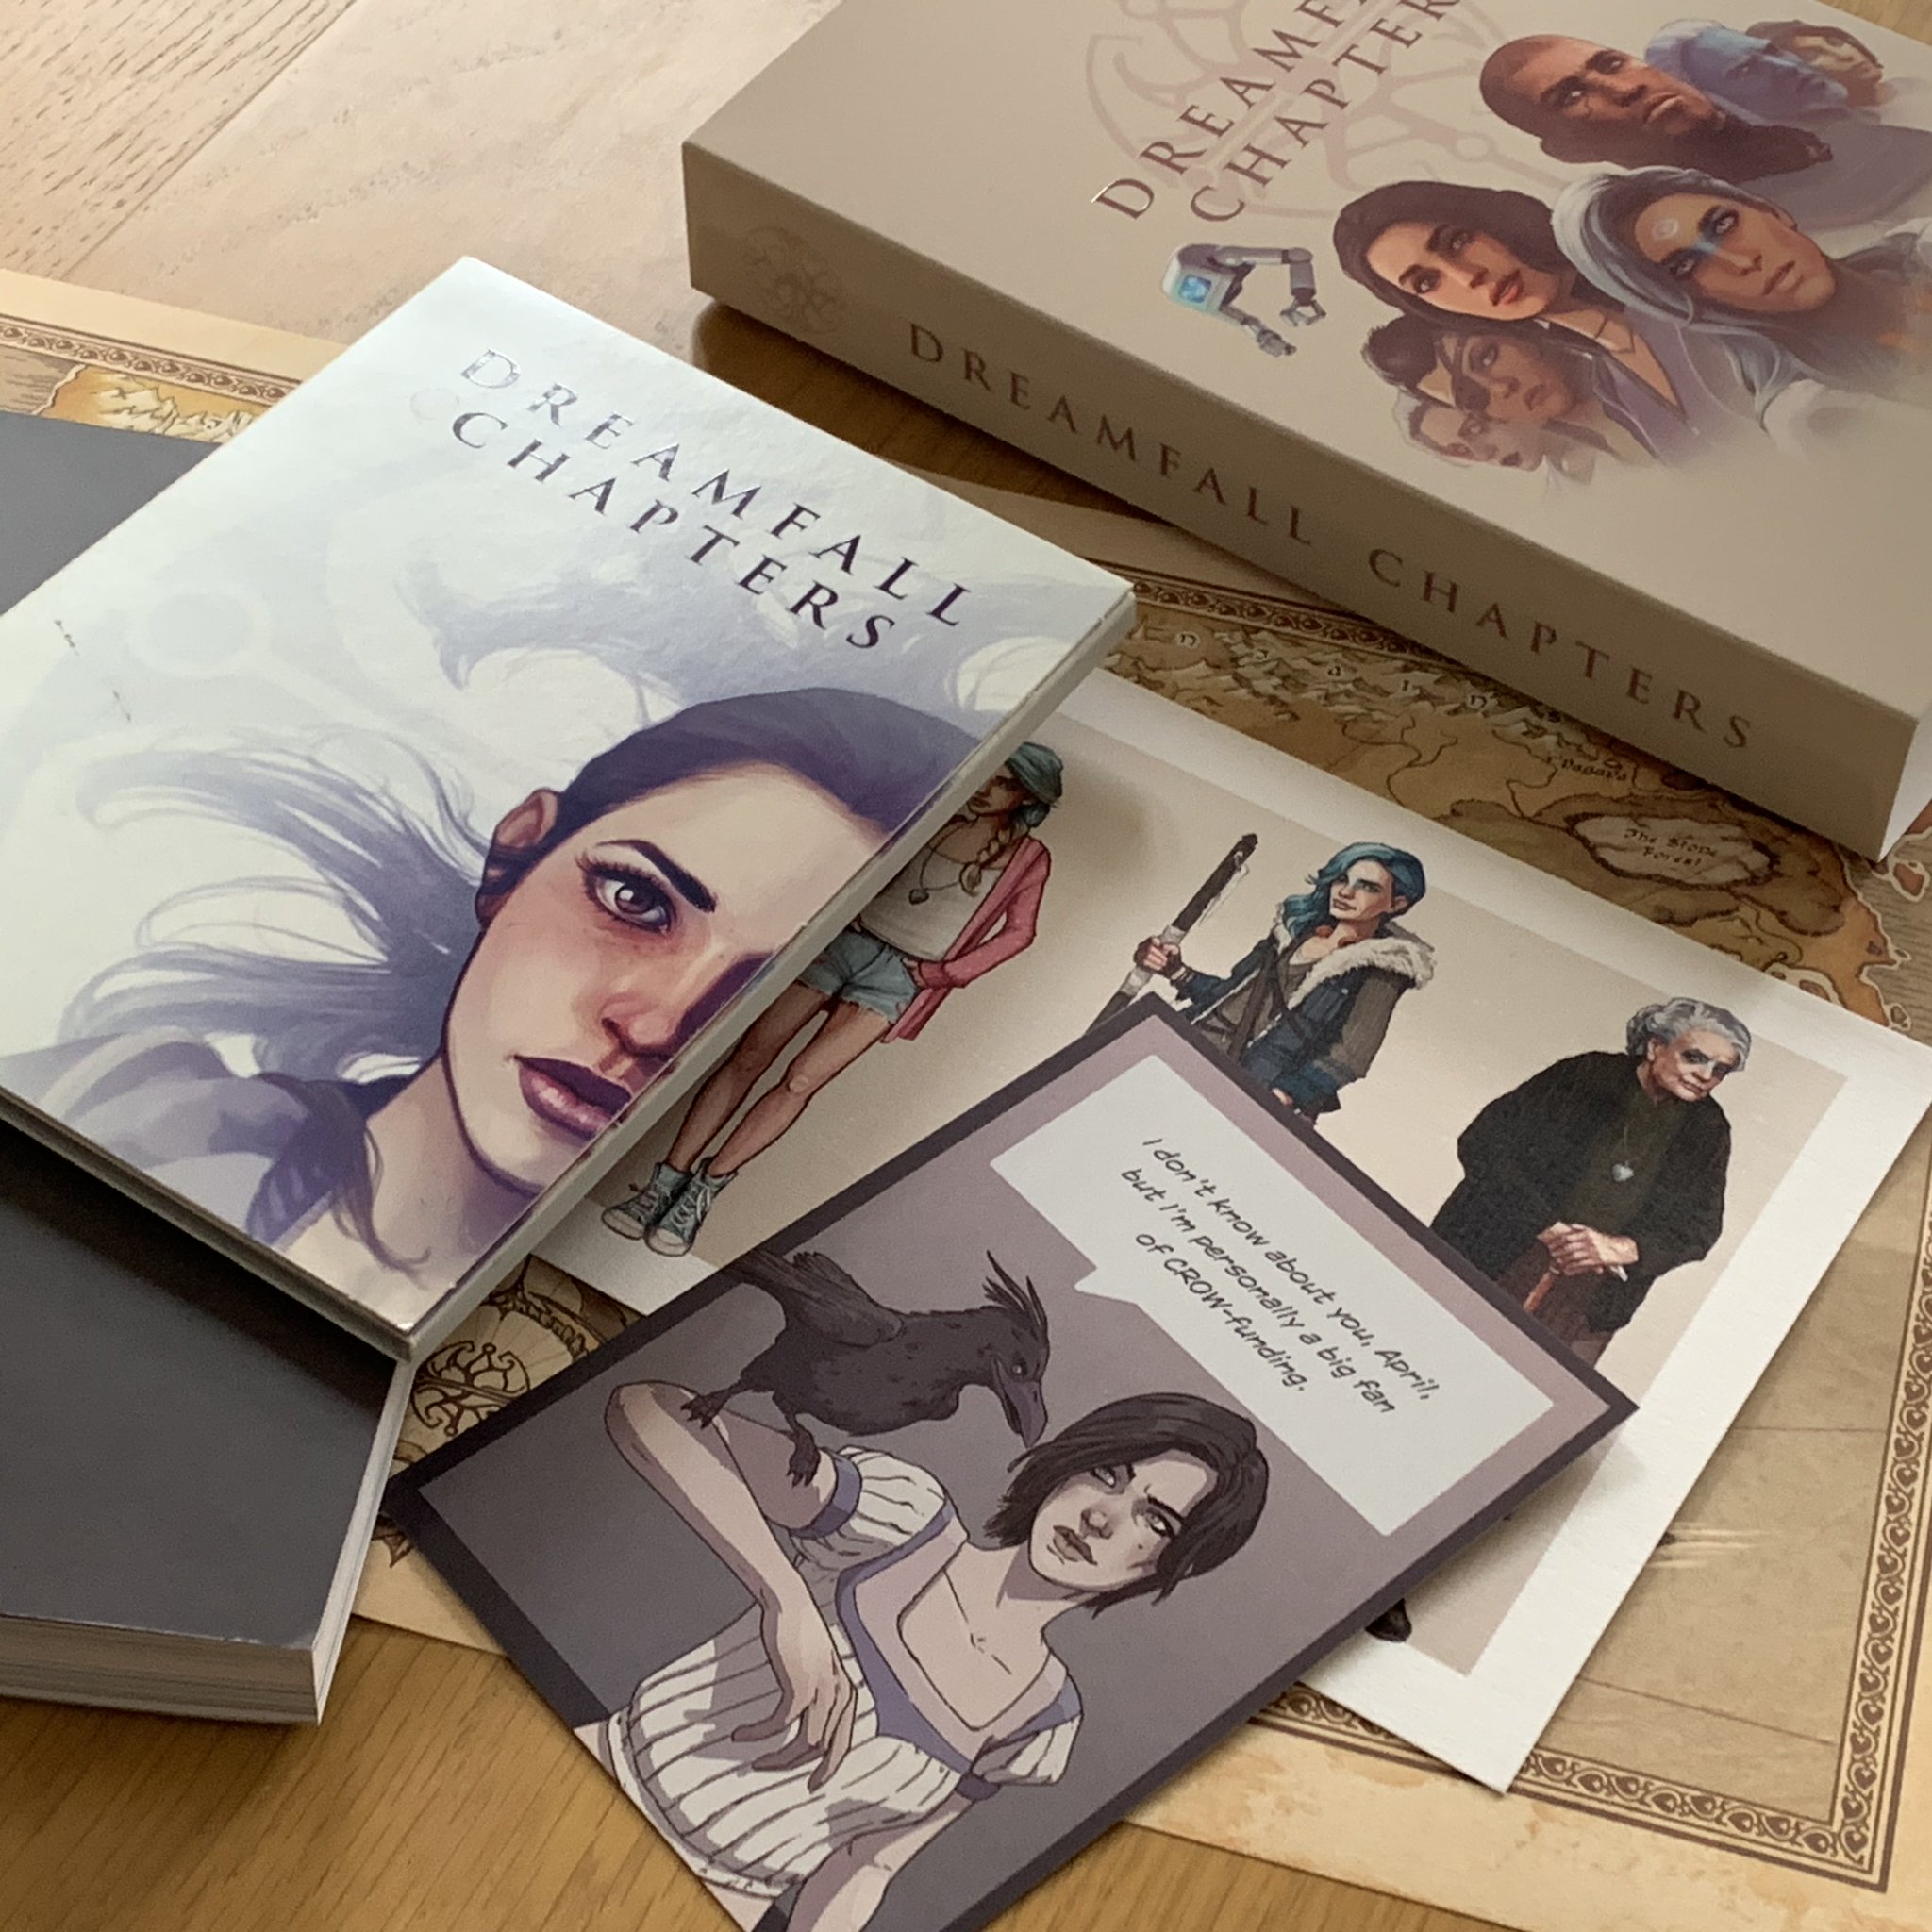 Ragnar Tornquist Unboxing The Special Backers Edition Of Dreamfall Chapters Still Missing The Wonkers Usb Key Soundtrack Cd Both In Production And Arriving Shortly But Otherwise Complete Looks And